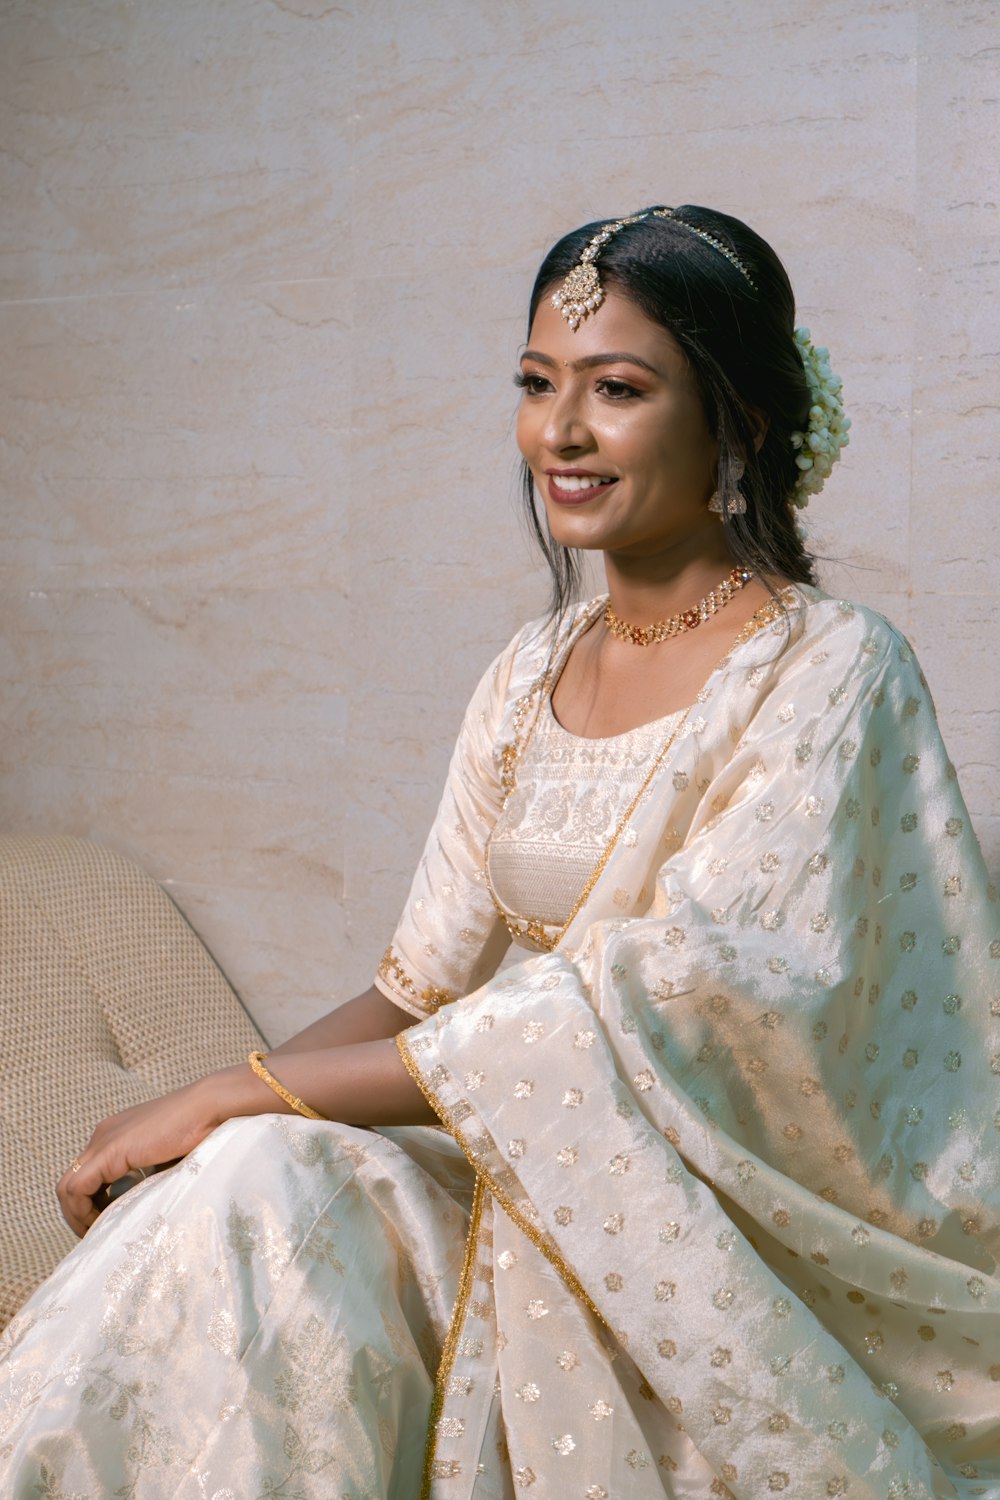 a woman in a white sari sitting on a couch